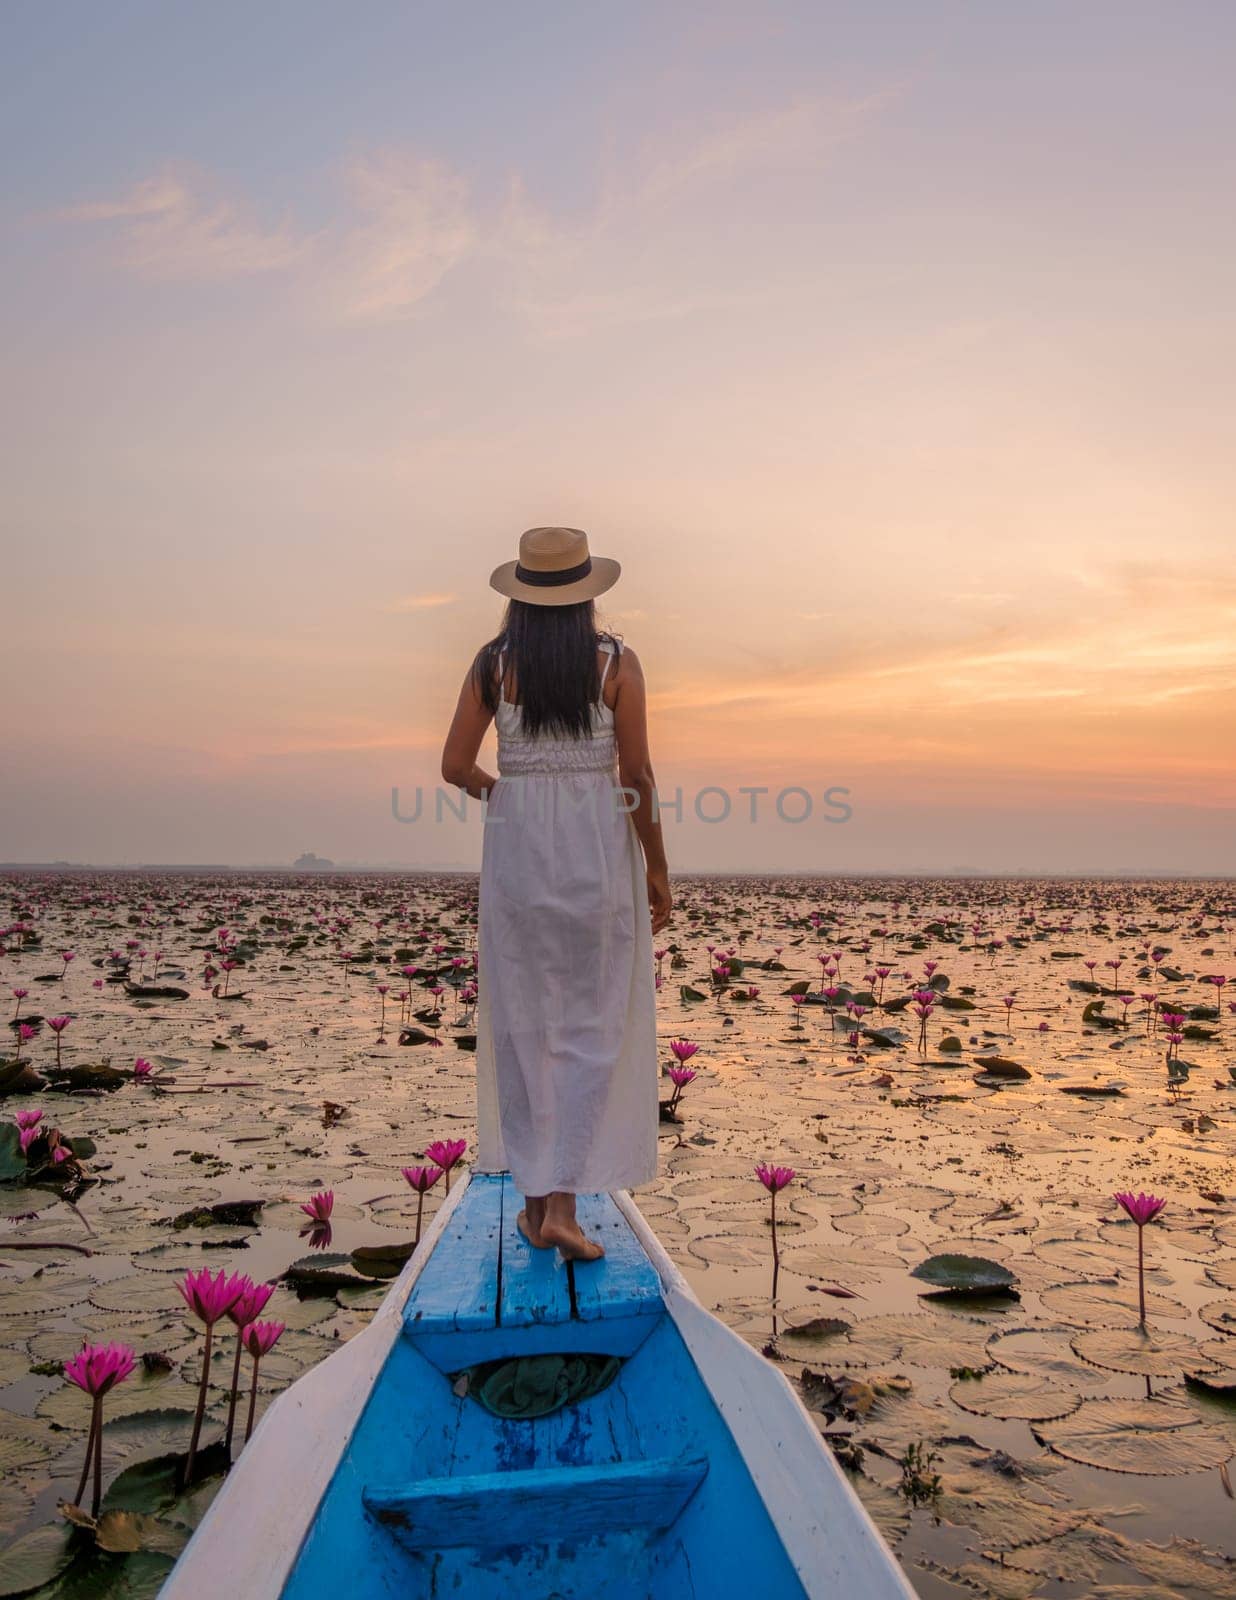 Sunrise at the sea of red lotus, Lake Nong Harn, Udon Thani, Thailand. Asian woman with a hat and dress on a boat at the Red Lotus Lake in the Isaan